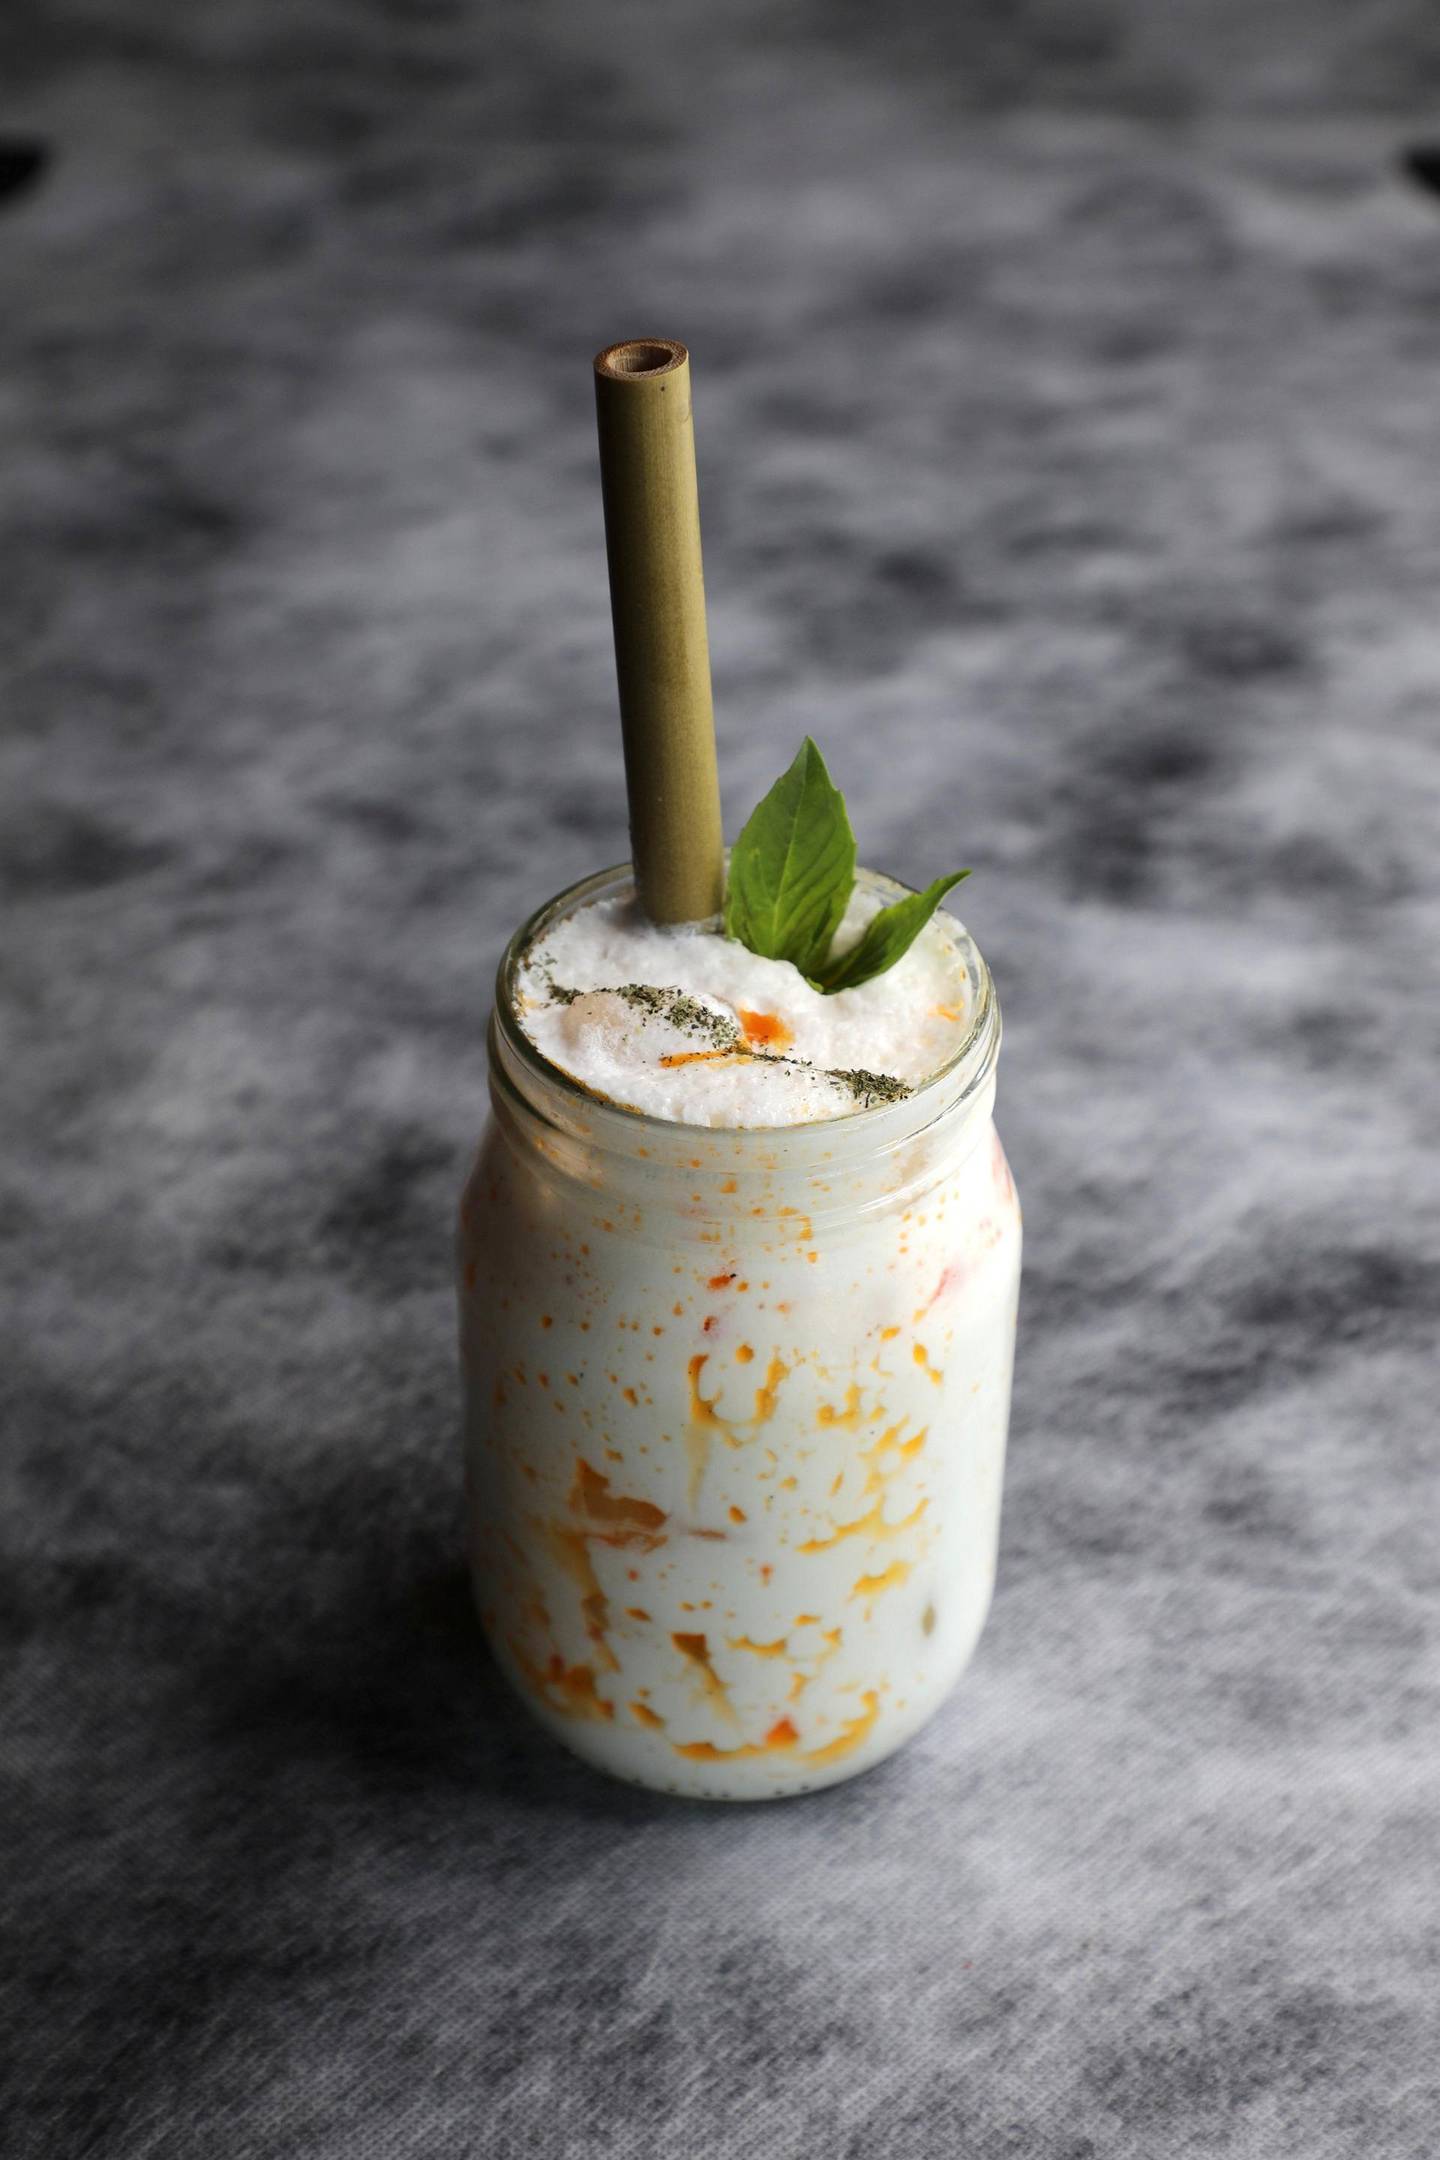 A limited-edition fruity laksa mocktail at The Noodle House's Dubai branches. Courtesy of The Noodle House